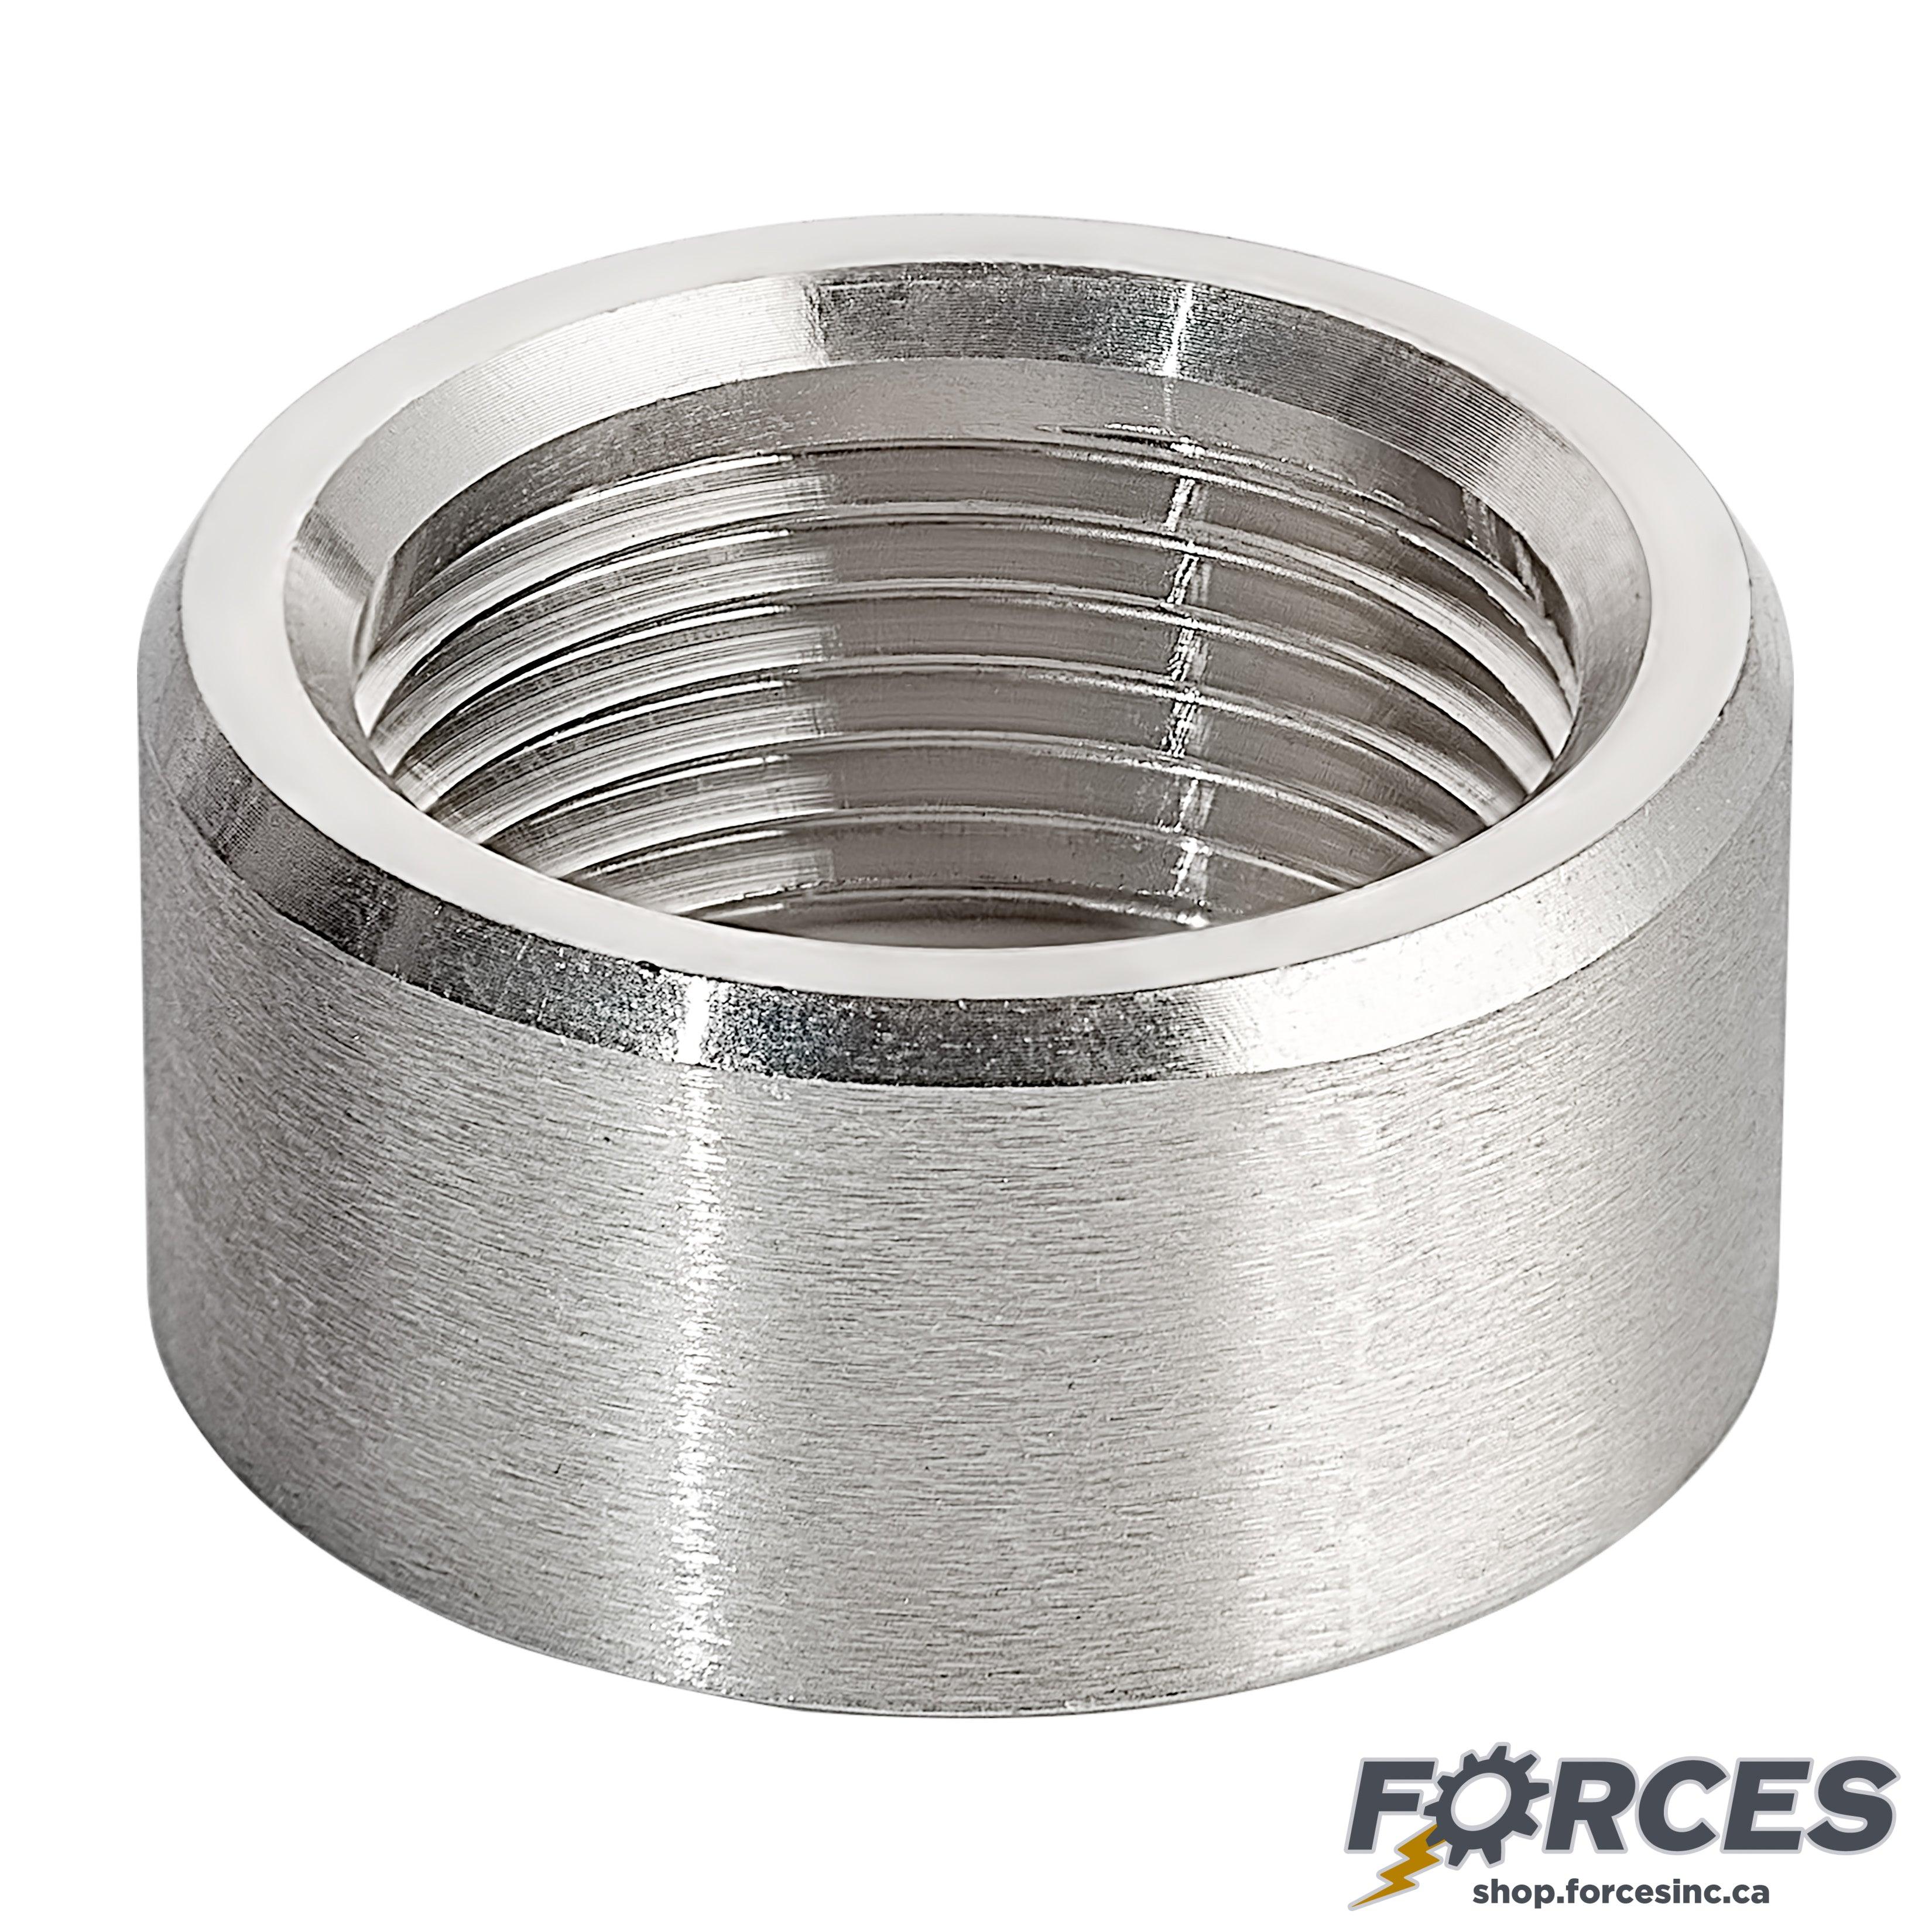 1/2" Half-Coupling NPT #150 - Stainless Steel 316 - Forces Inc